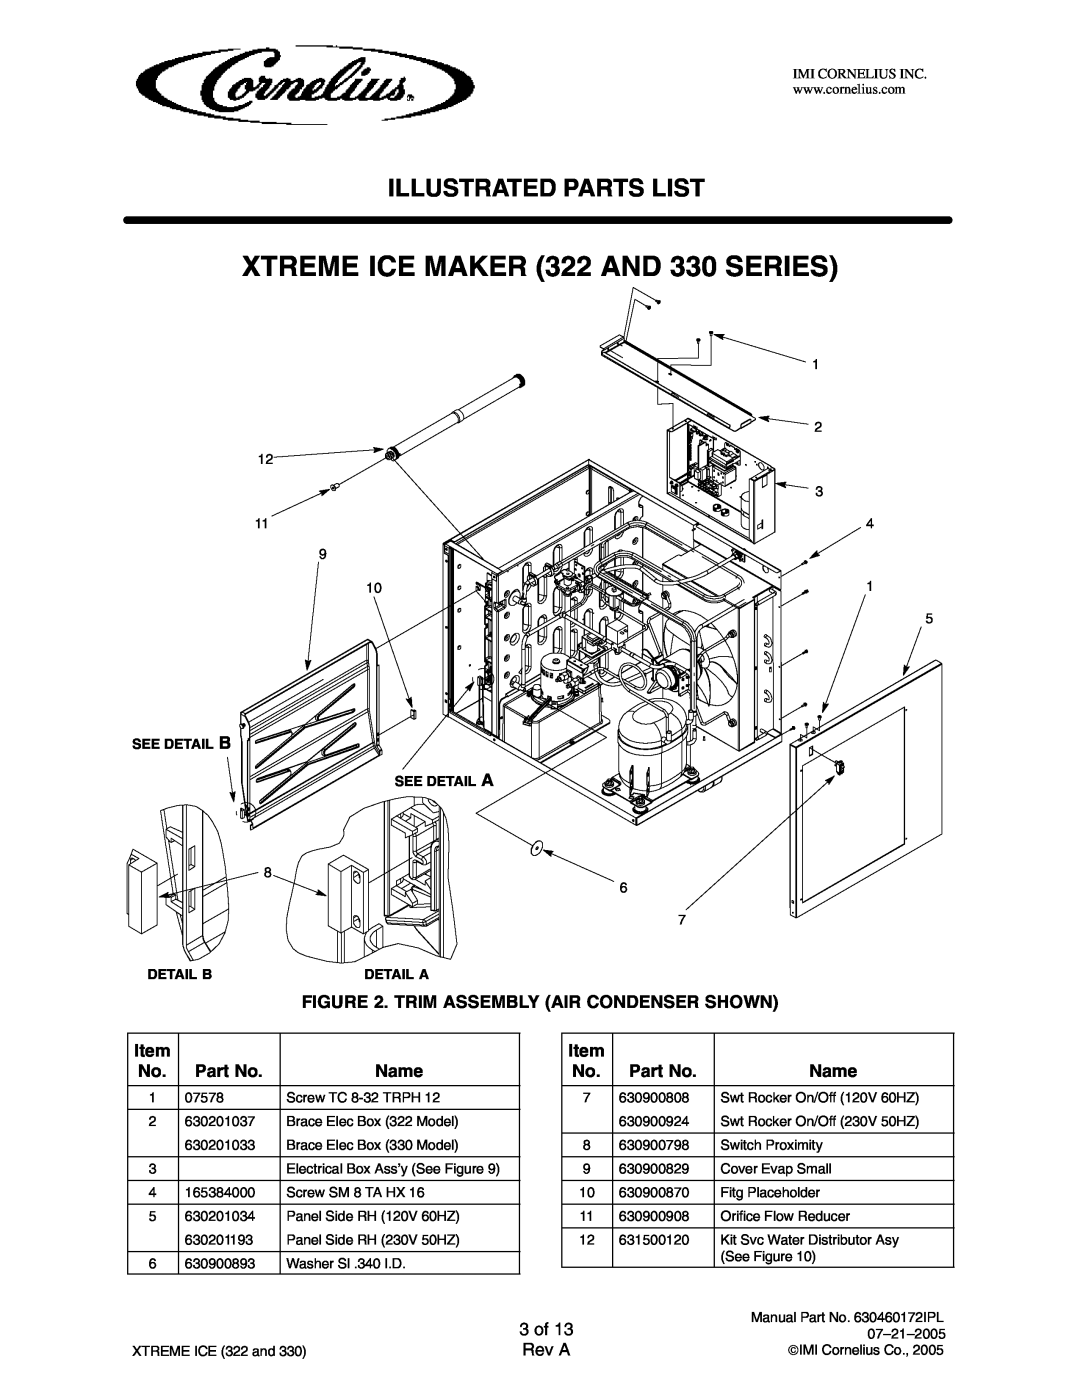 Cornelius 631803021 3 of, XTREME ICE MAKER 322 AND 330 SERIES, Illustrated Parts List, Rev A, See Detail B See Detail A 